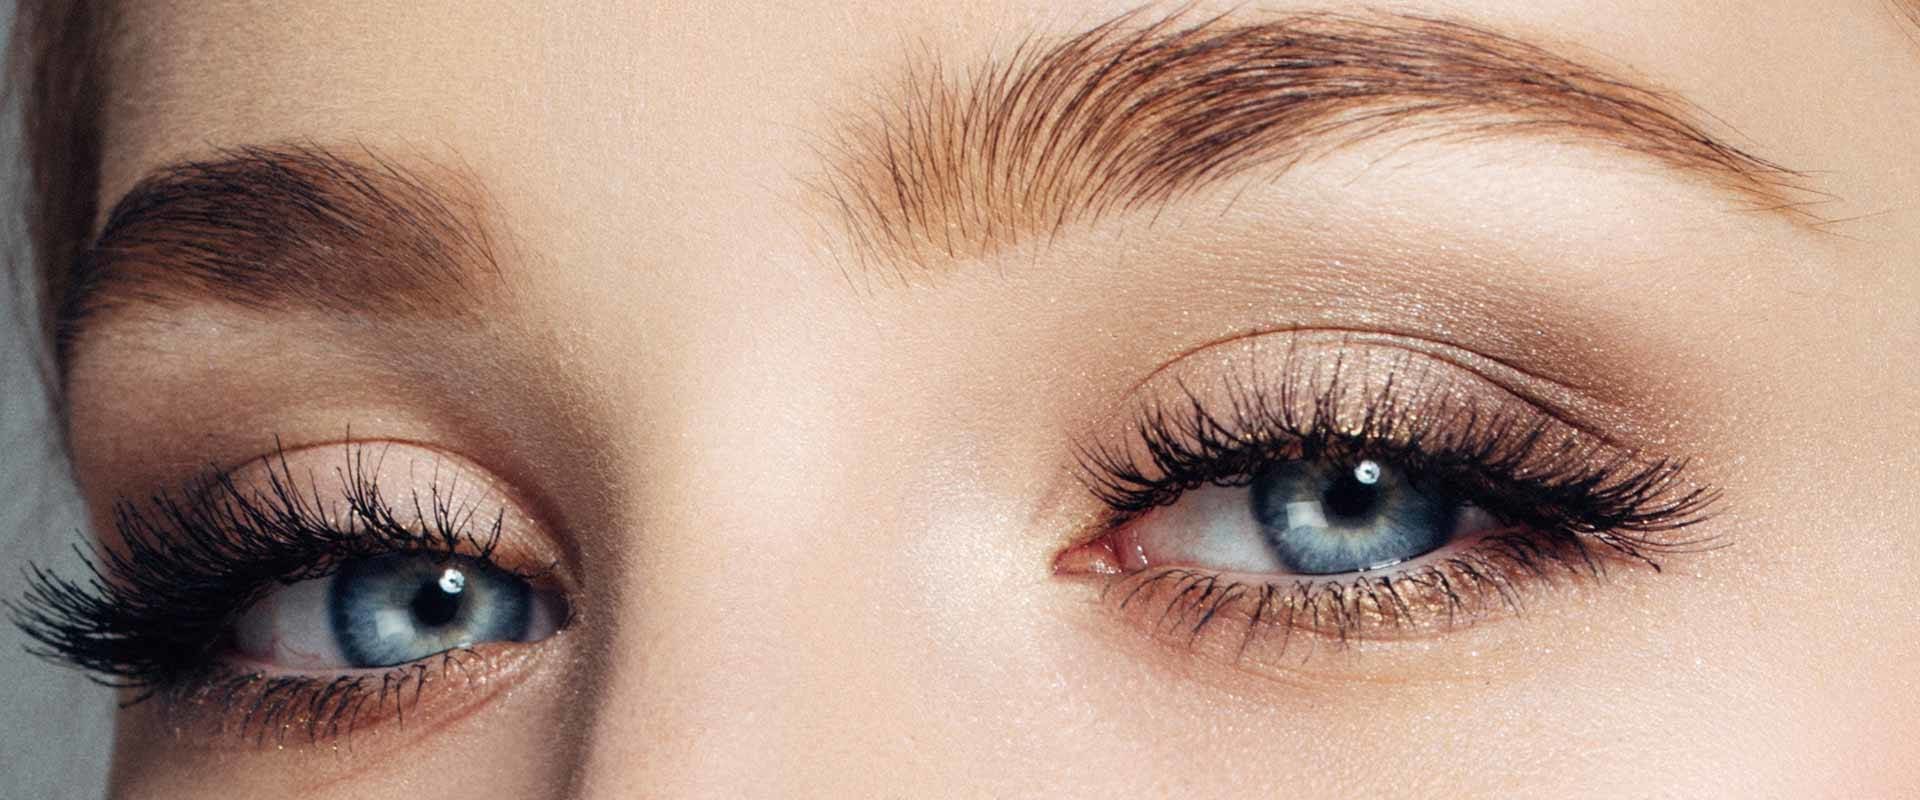 What does wispy mean for eyelashes?